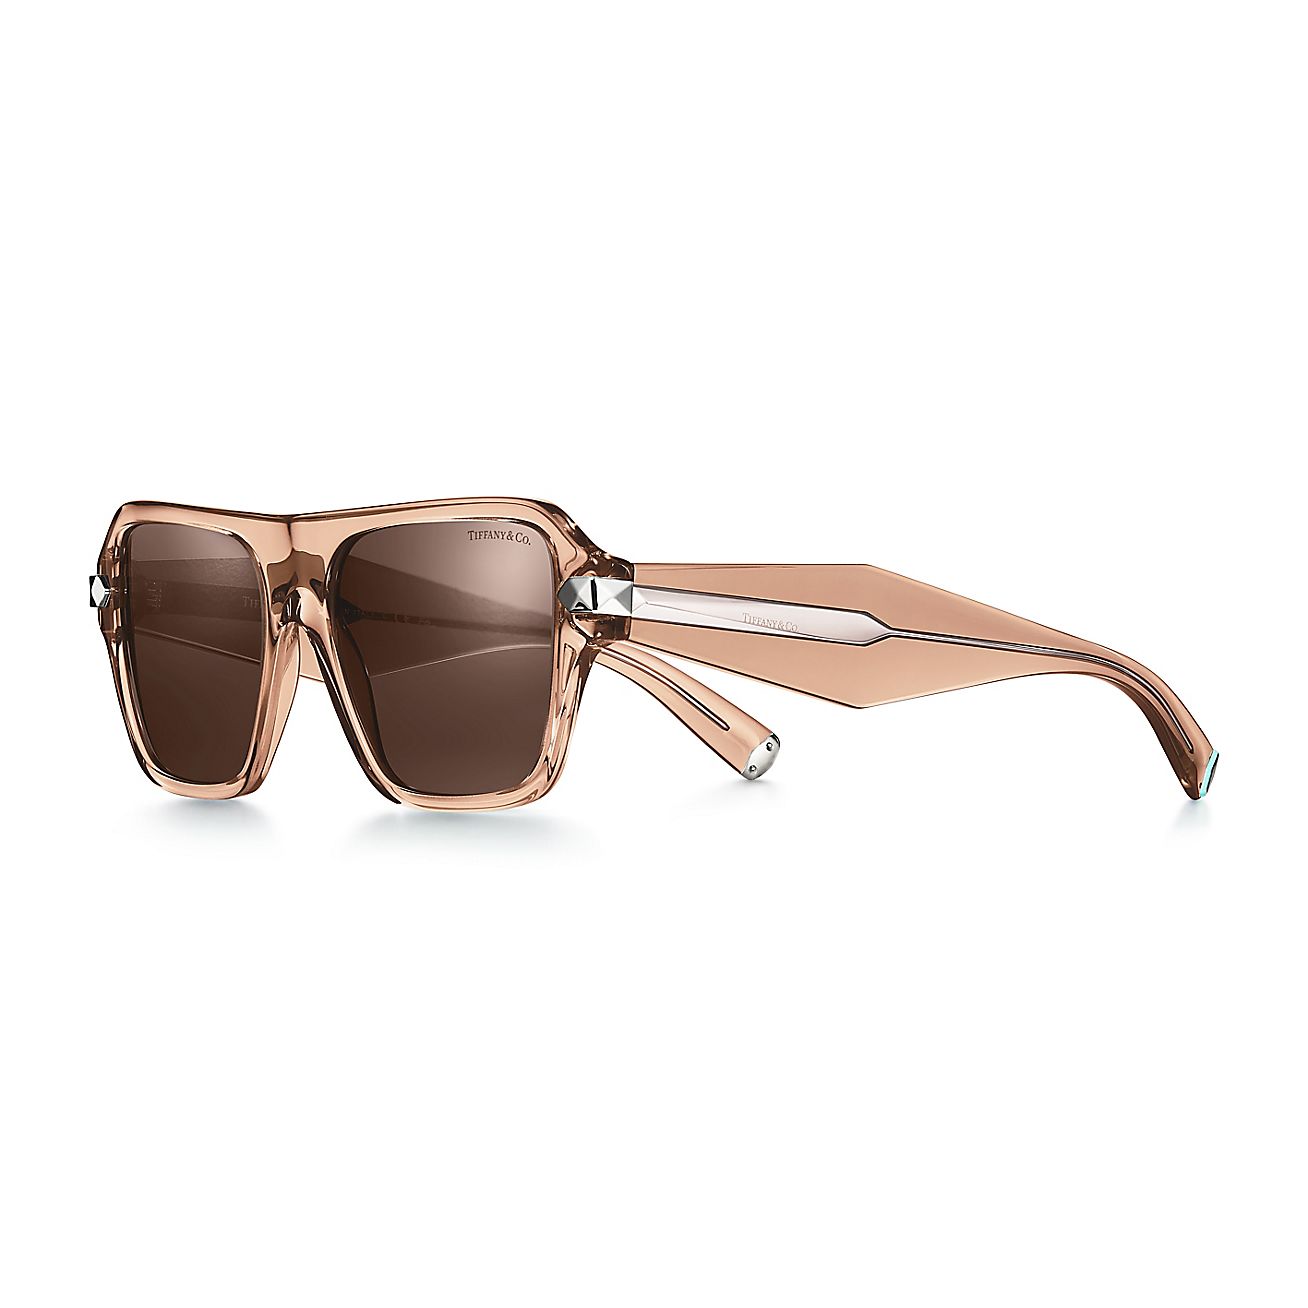 Tiffany Sunglasses in Champagne Acetate with Light Brown Lenses